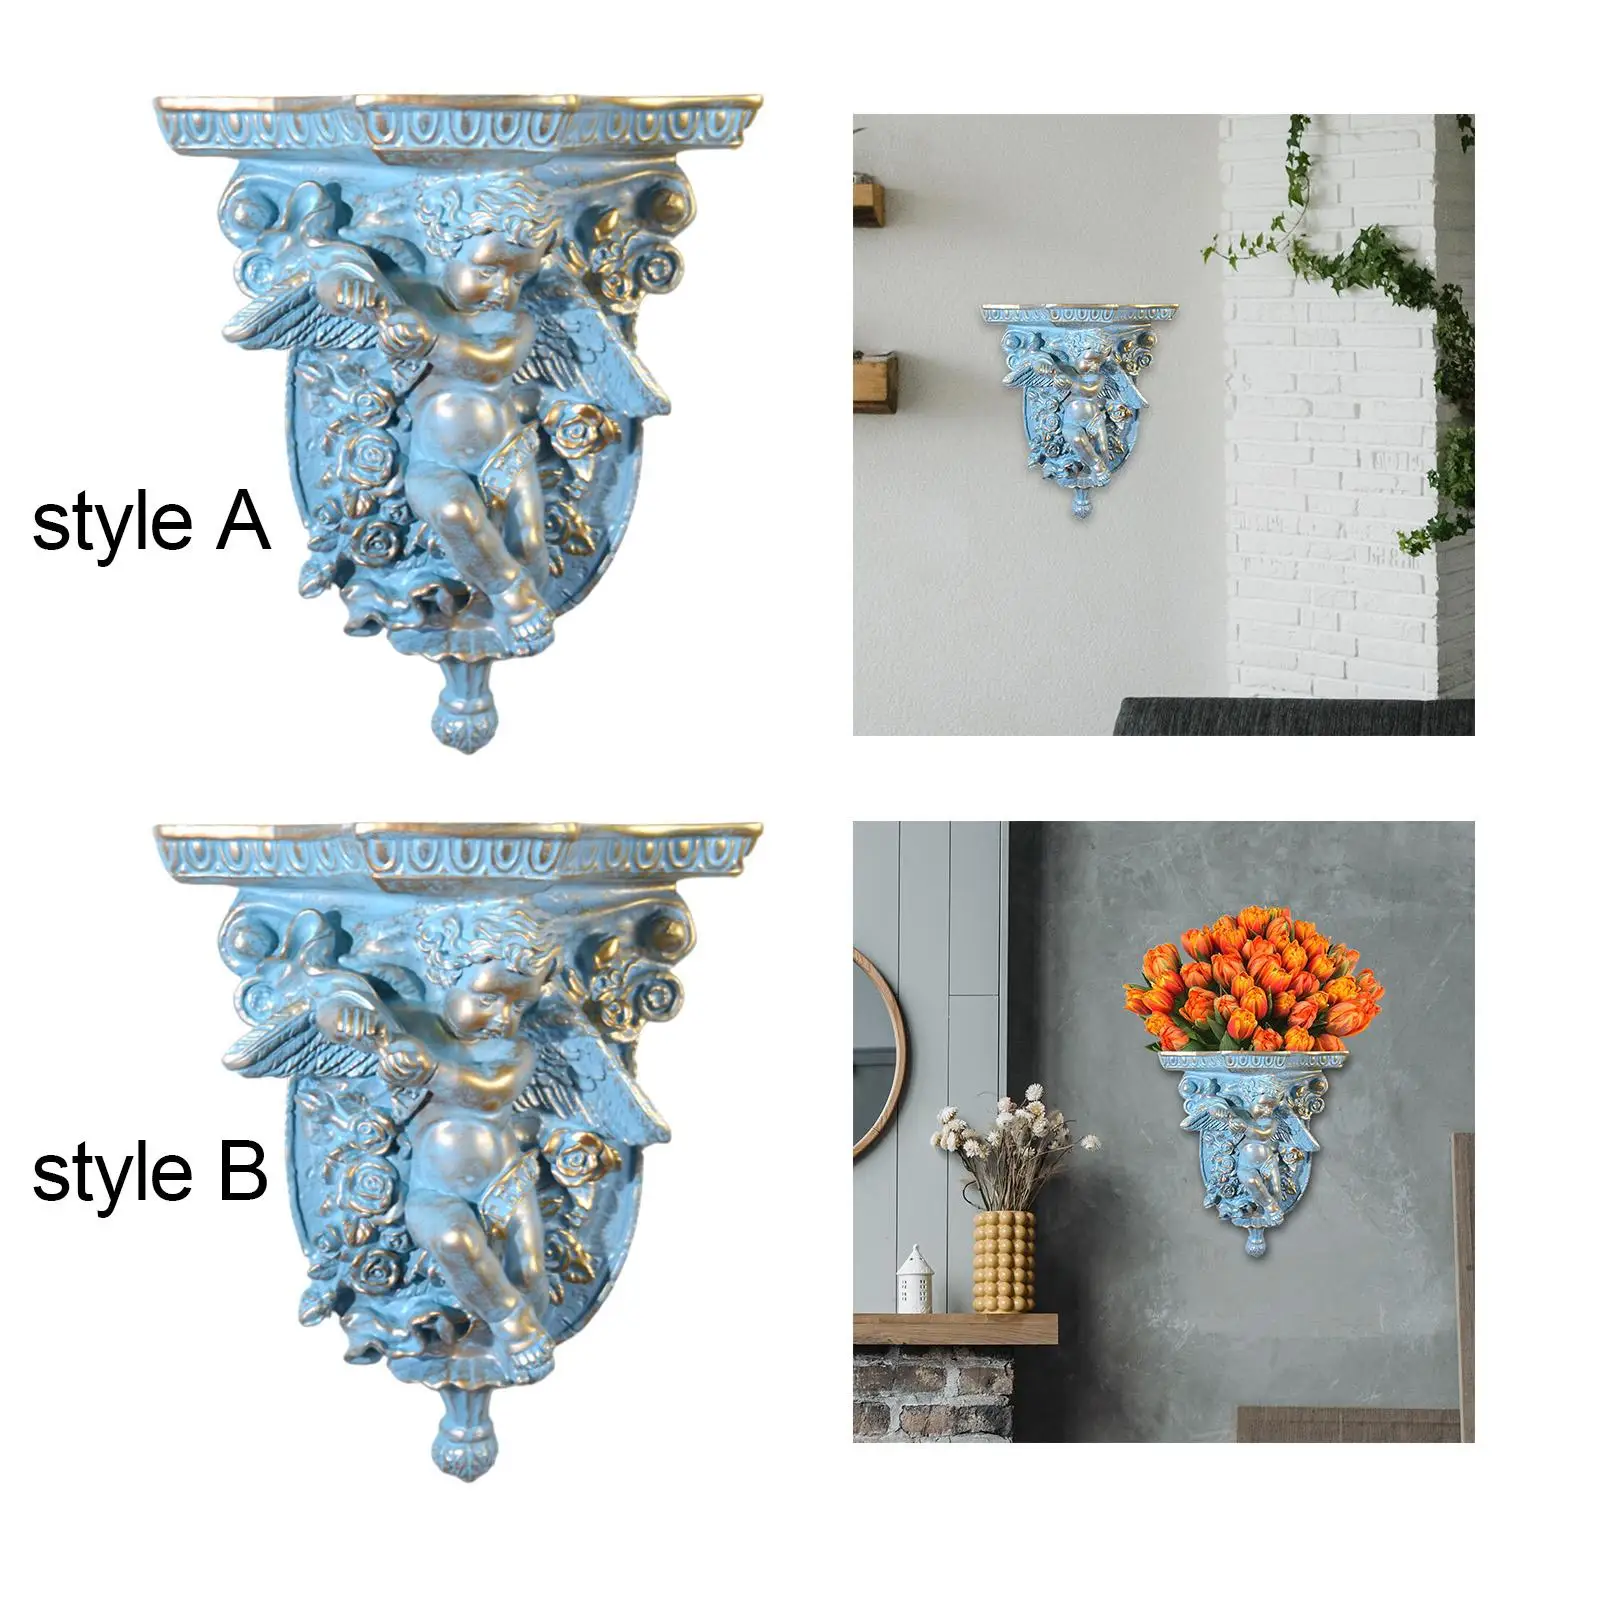 Vintage style Floating Shelf Decorative Hollow Flower Carving Wall Art Display Shelves Wall Organizer for Office Hallway